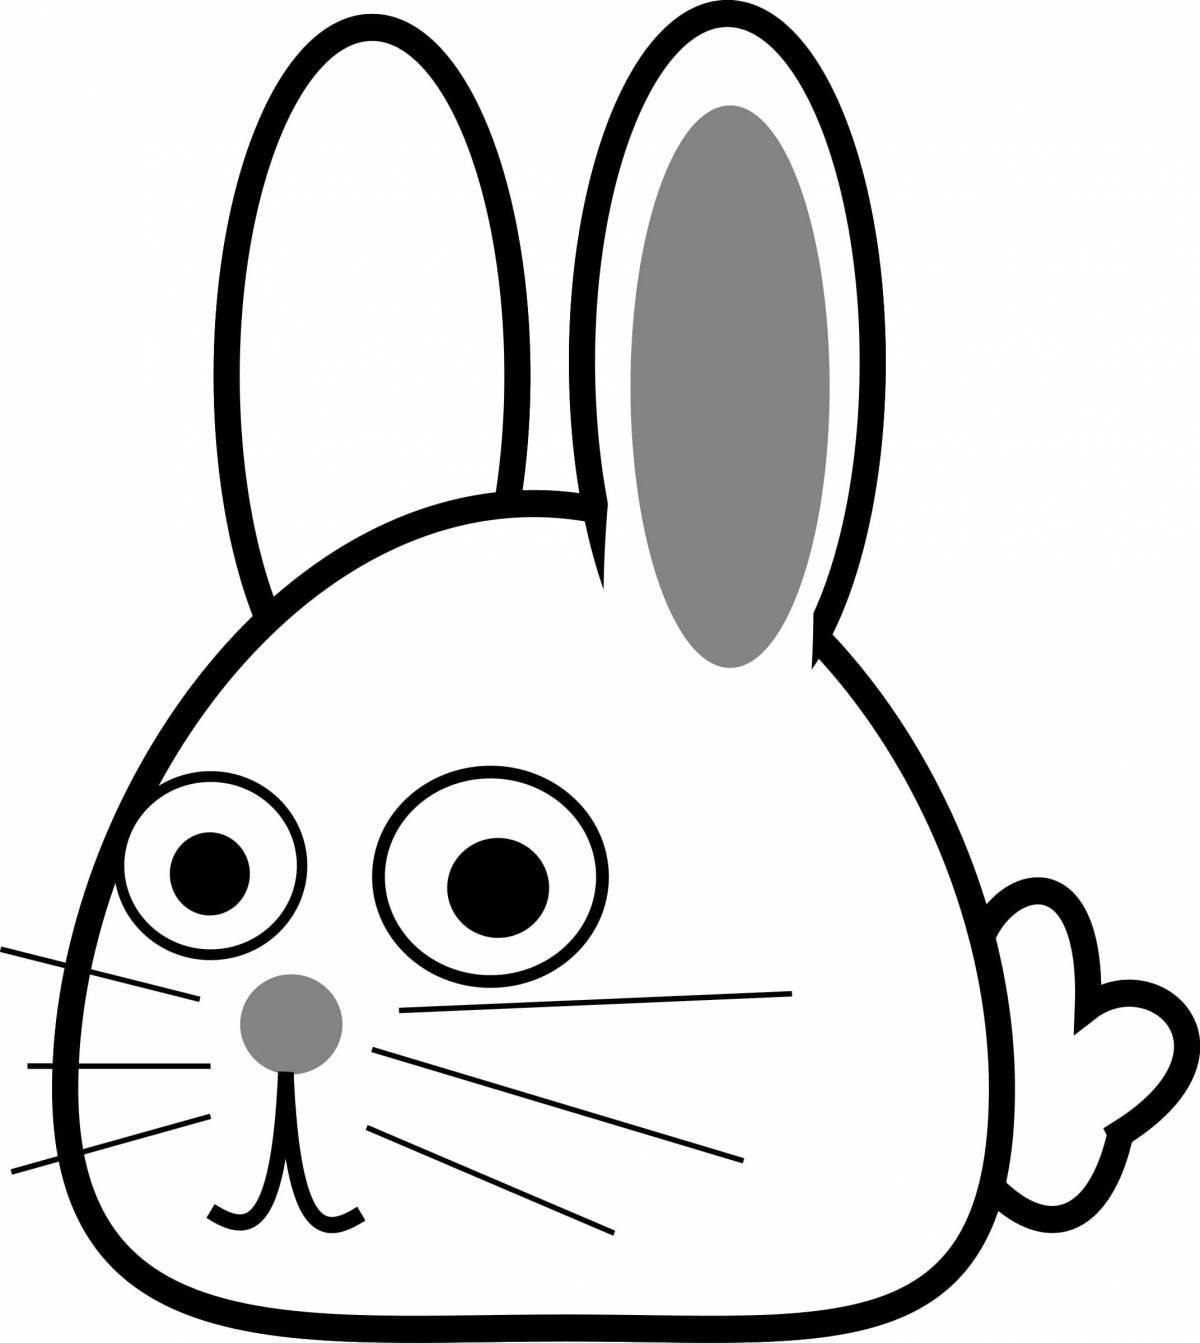 Cute and playful bunny coloring book